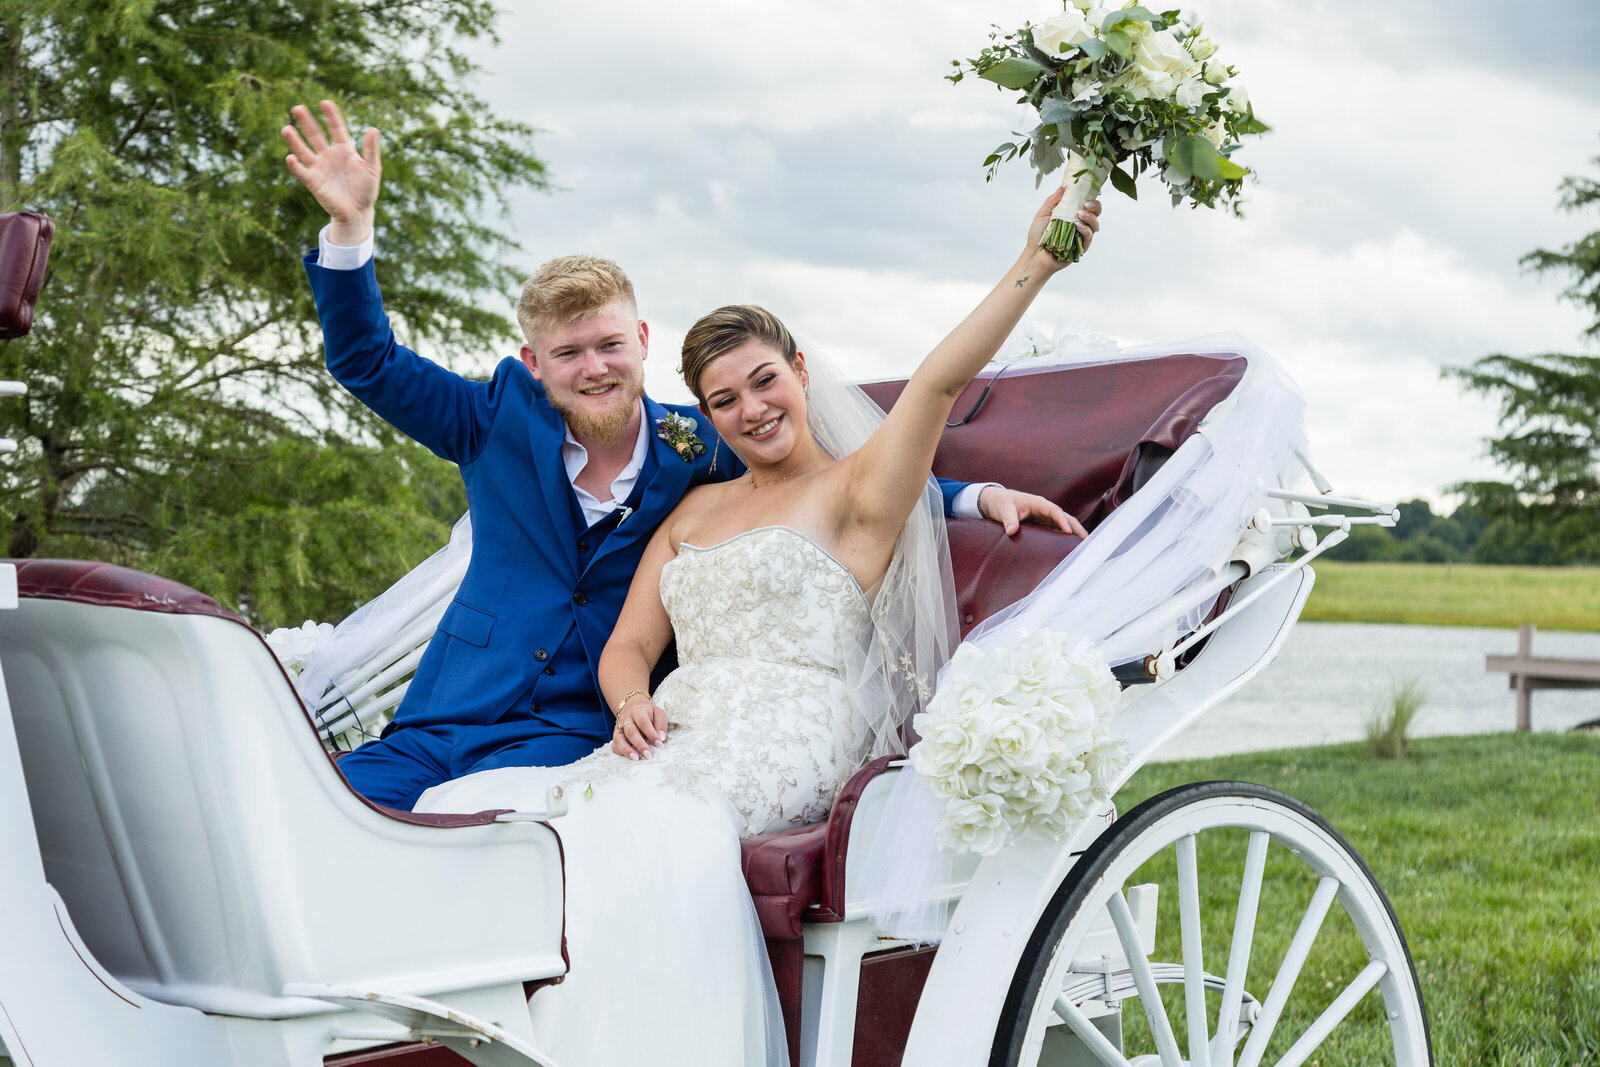 Newly married couple riding away  in horse drawn carriage